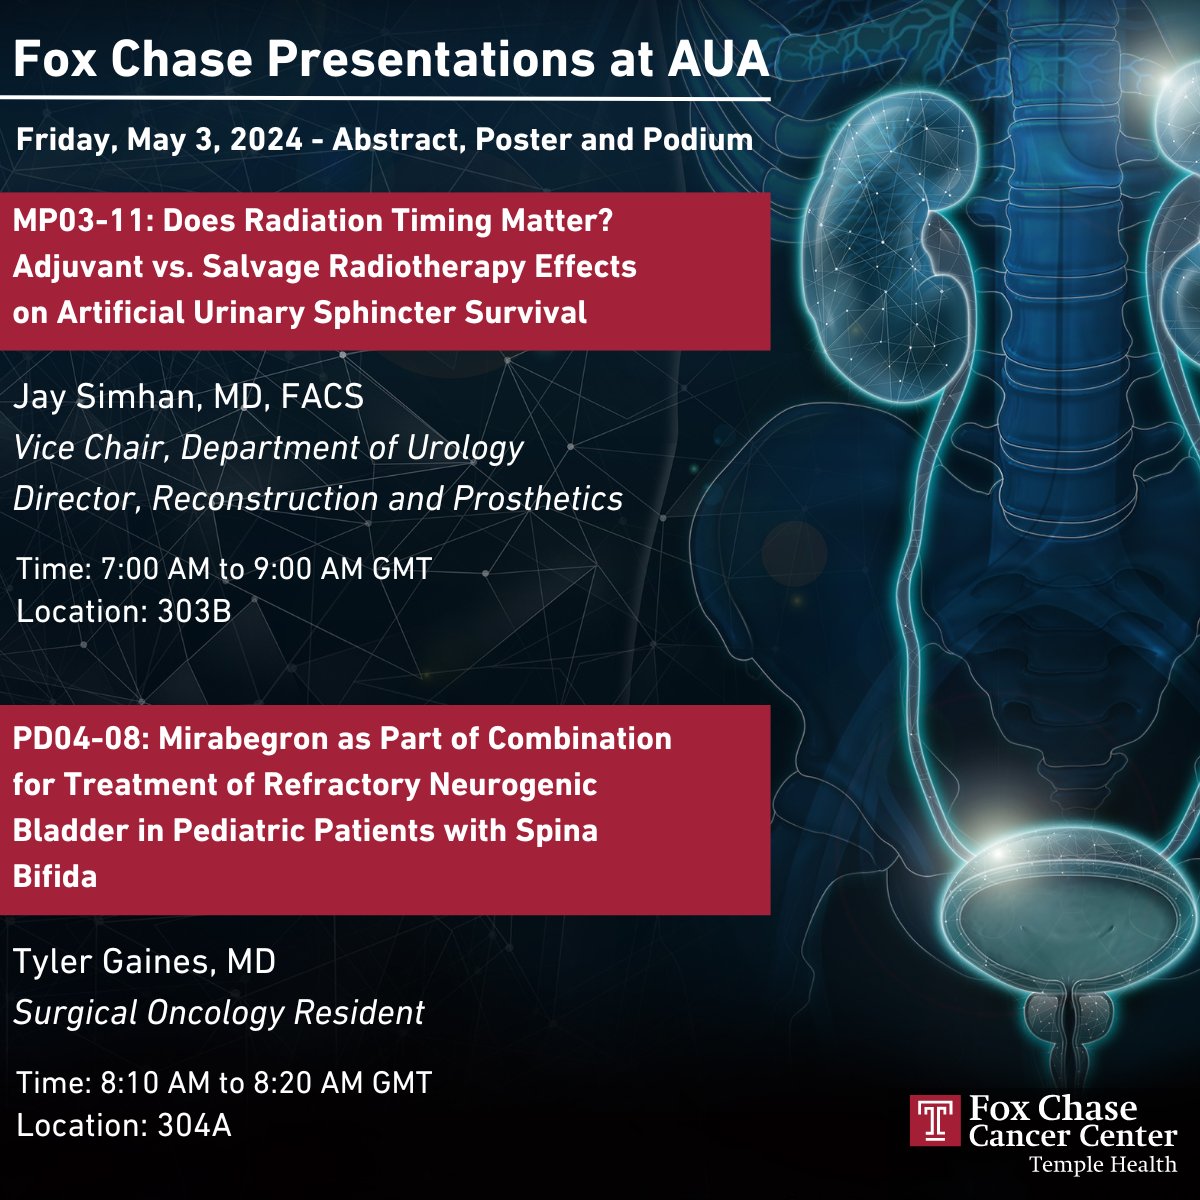 Fox Chase abstract, poster and podium presentations at #AUA24 happening this morning! Hear from Jay Simhan, MD, FACS, (@JSimhan), Vice Chair in the Department of Urology, and Tyler Gaines, MD, Surgical Oncology Resident. ⬇️